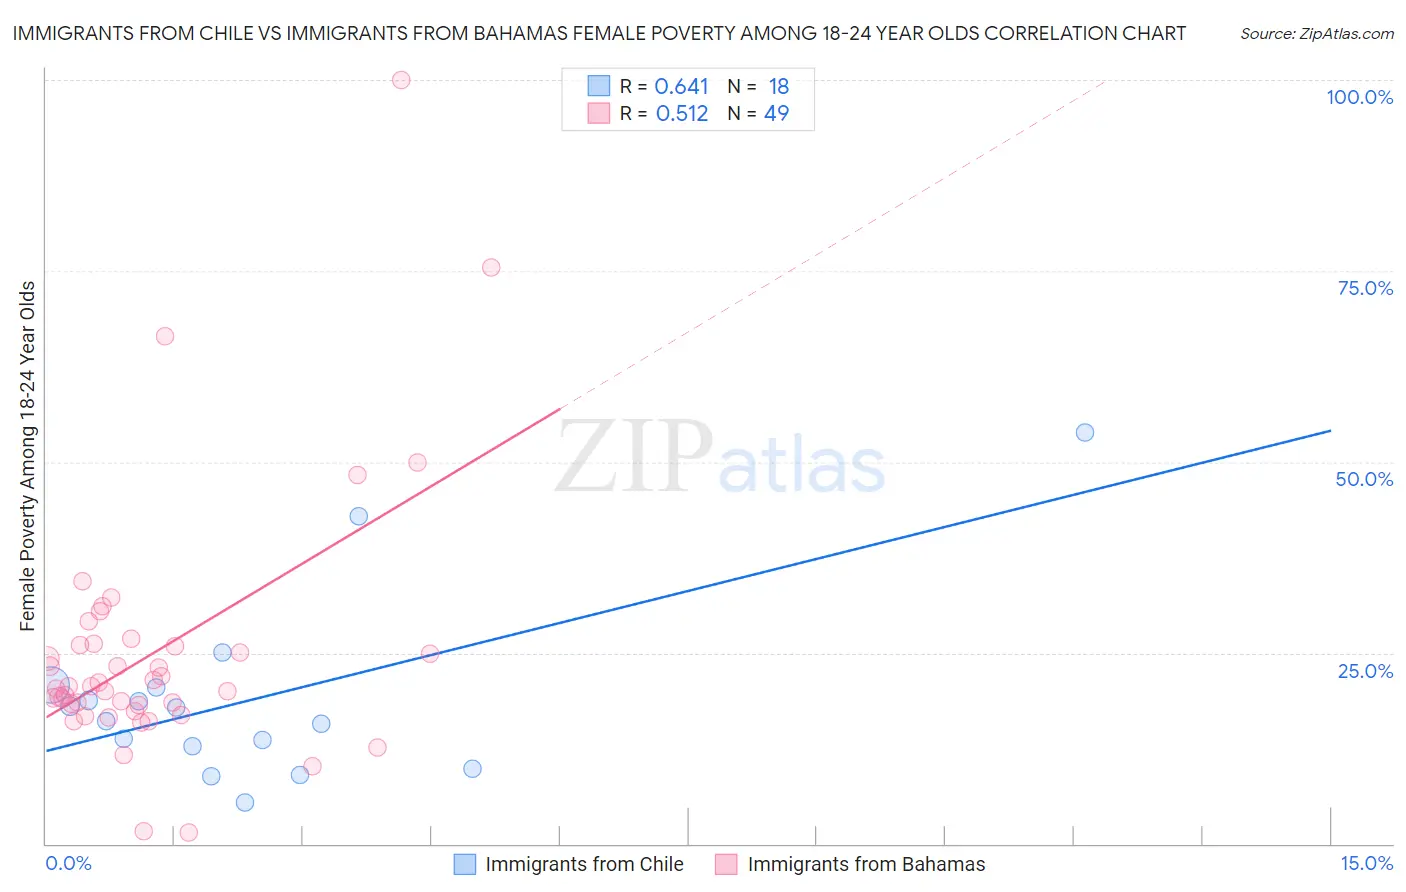 Immigrants from Chile vs Immigrants from Bahamas Female Poverty Among 18-24 Year Olds